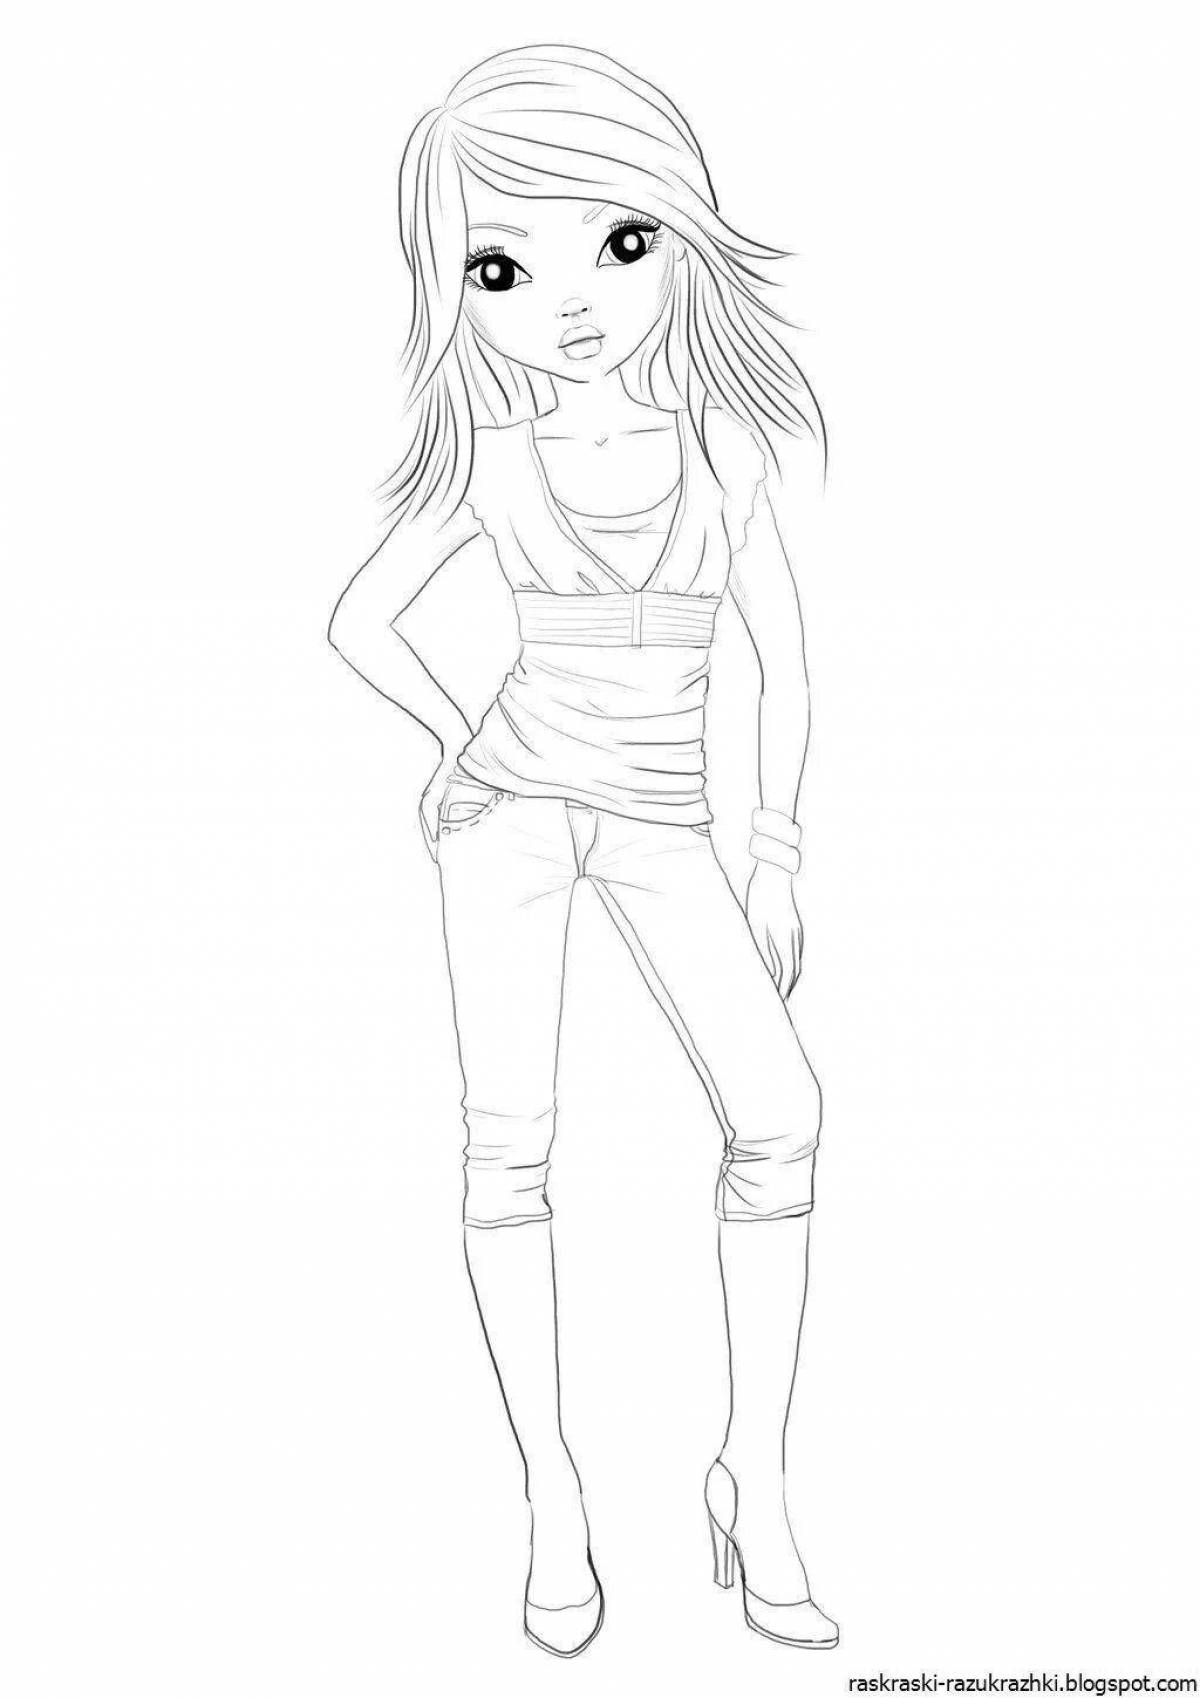 Coloring page of a violent standing girl